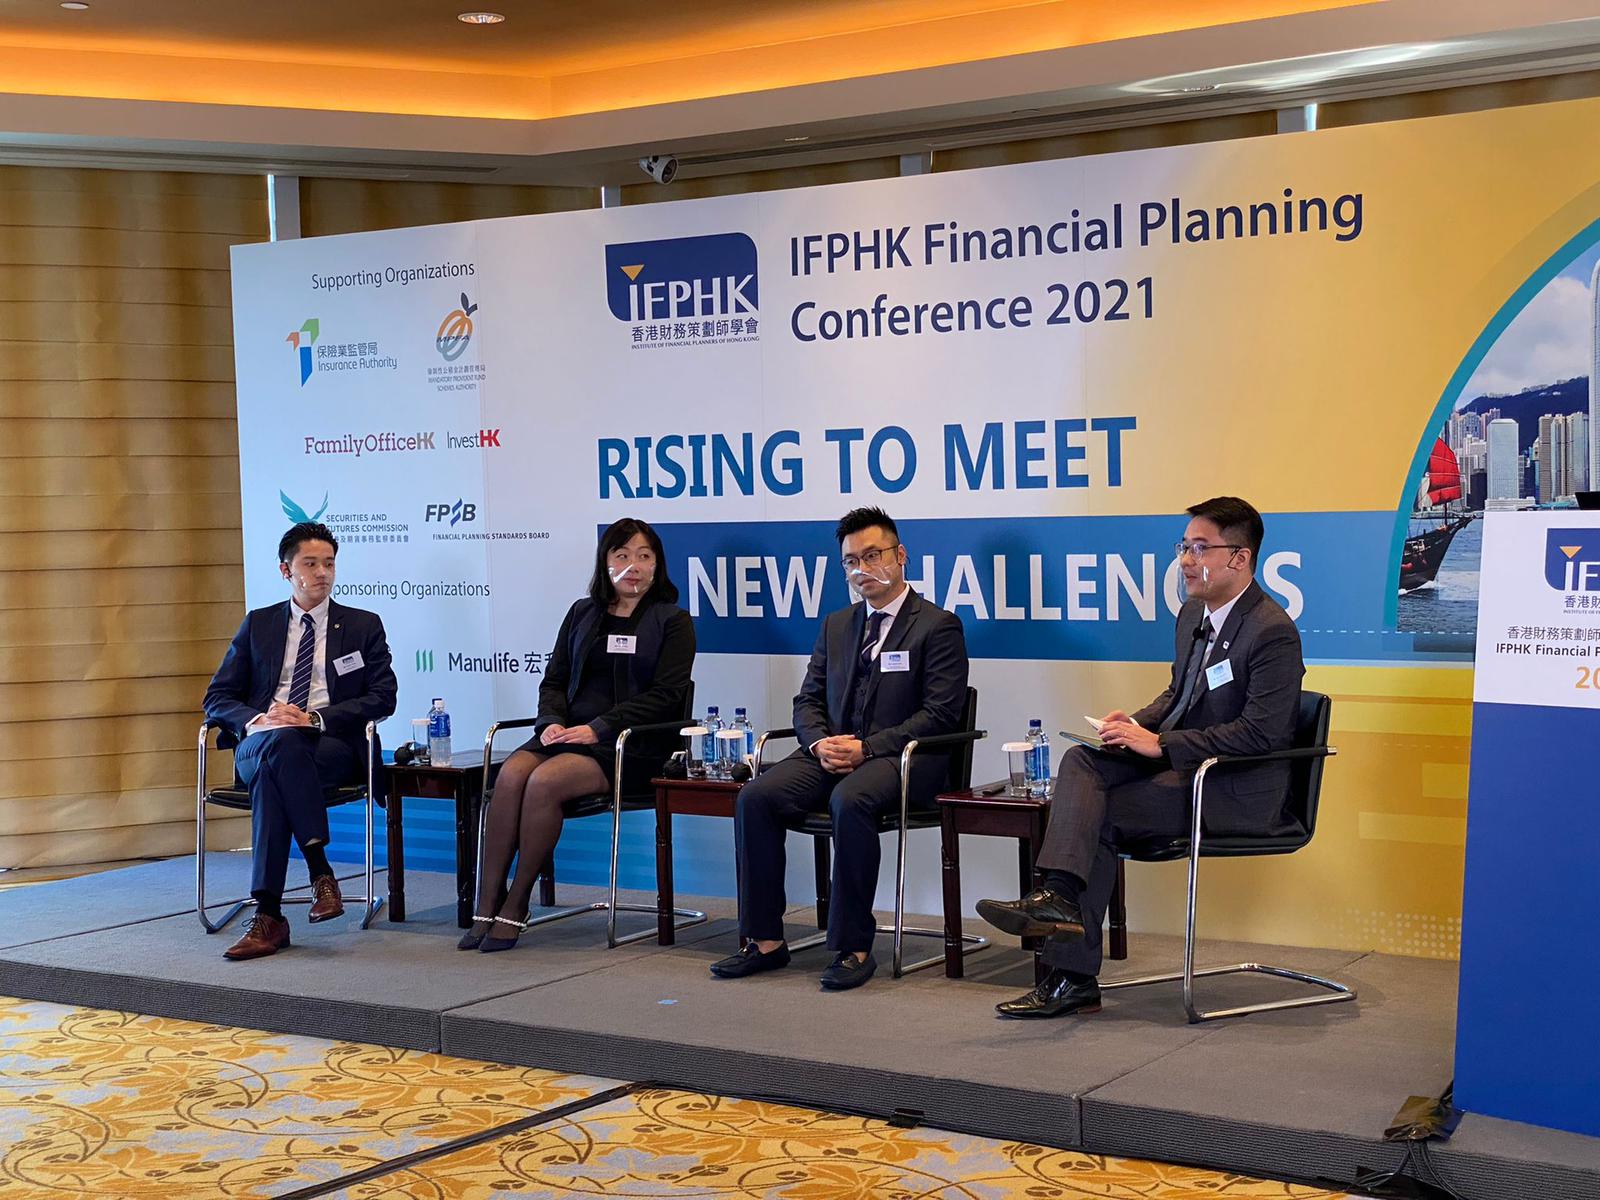 Mr. Xavier Chan, the Founder and Managing Partner of CWK Global was invited to IFPHK Financial Planning Conference